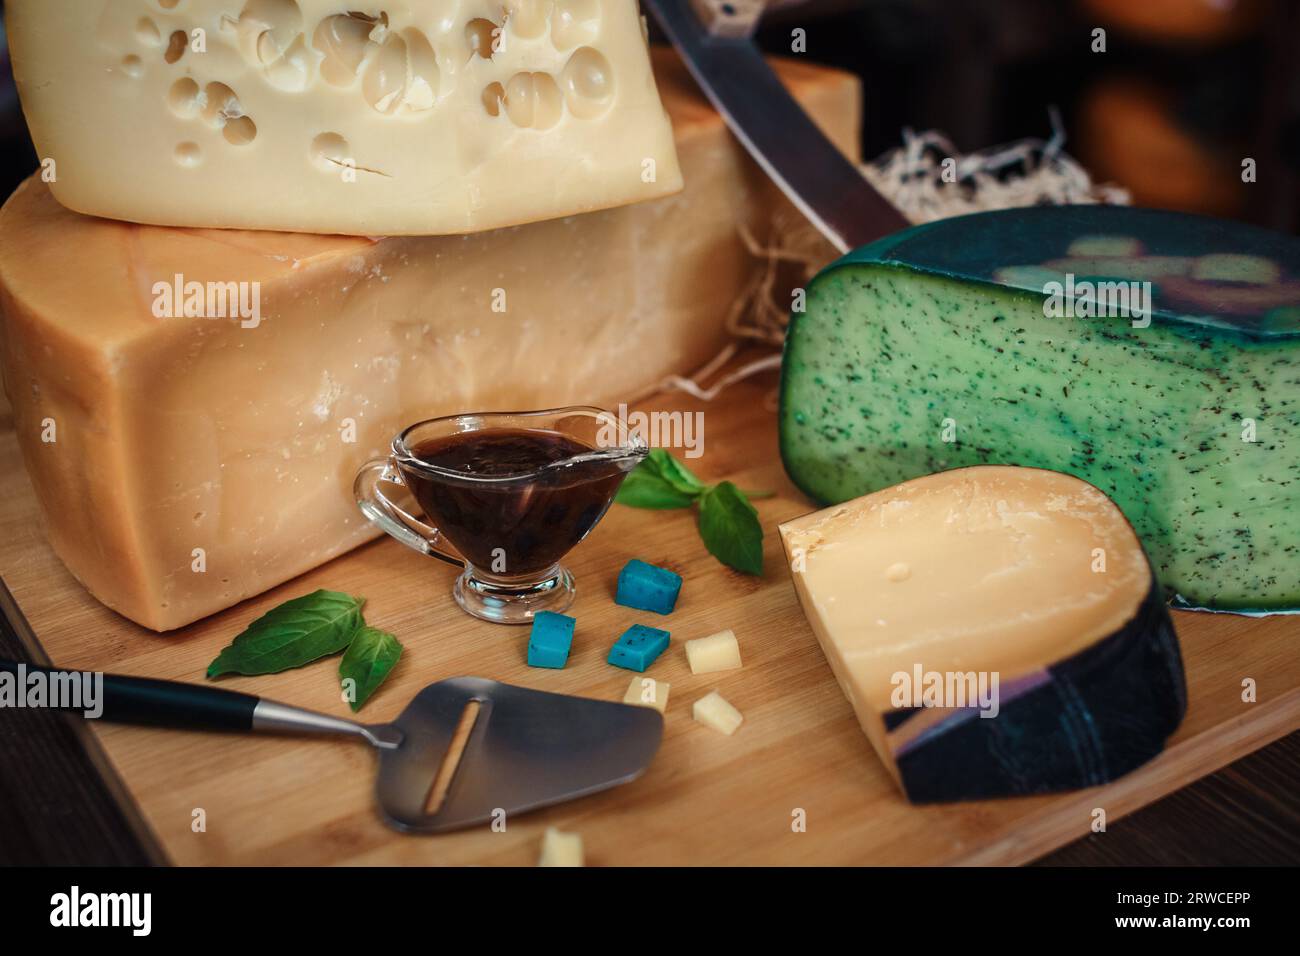 Cheese heads with slices and knives lie on a wooden board with an interior Stock Photo